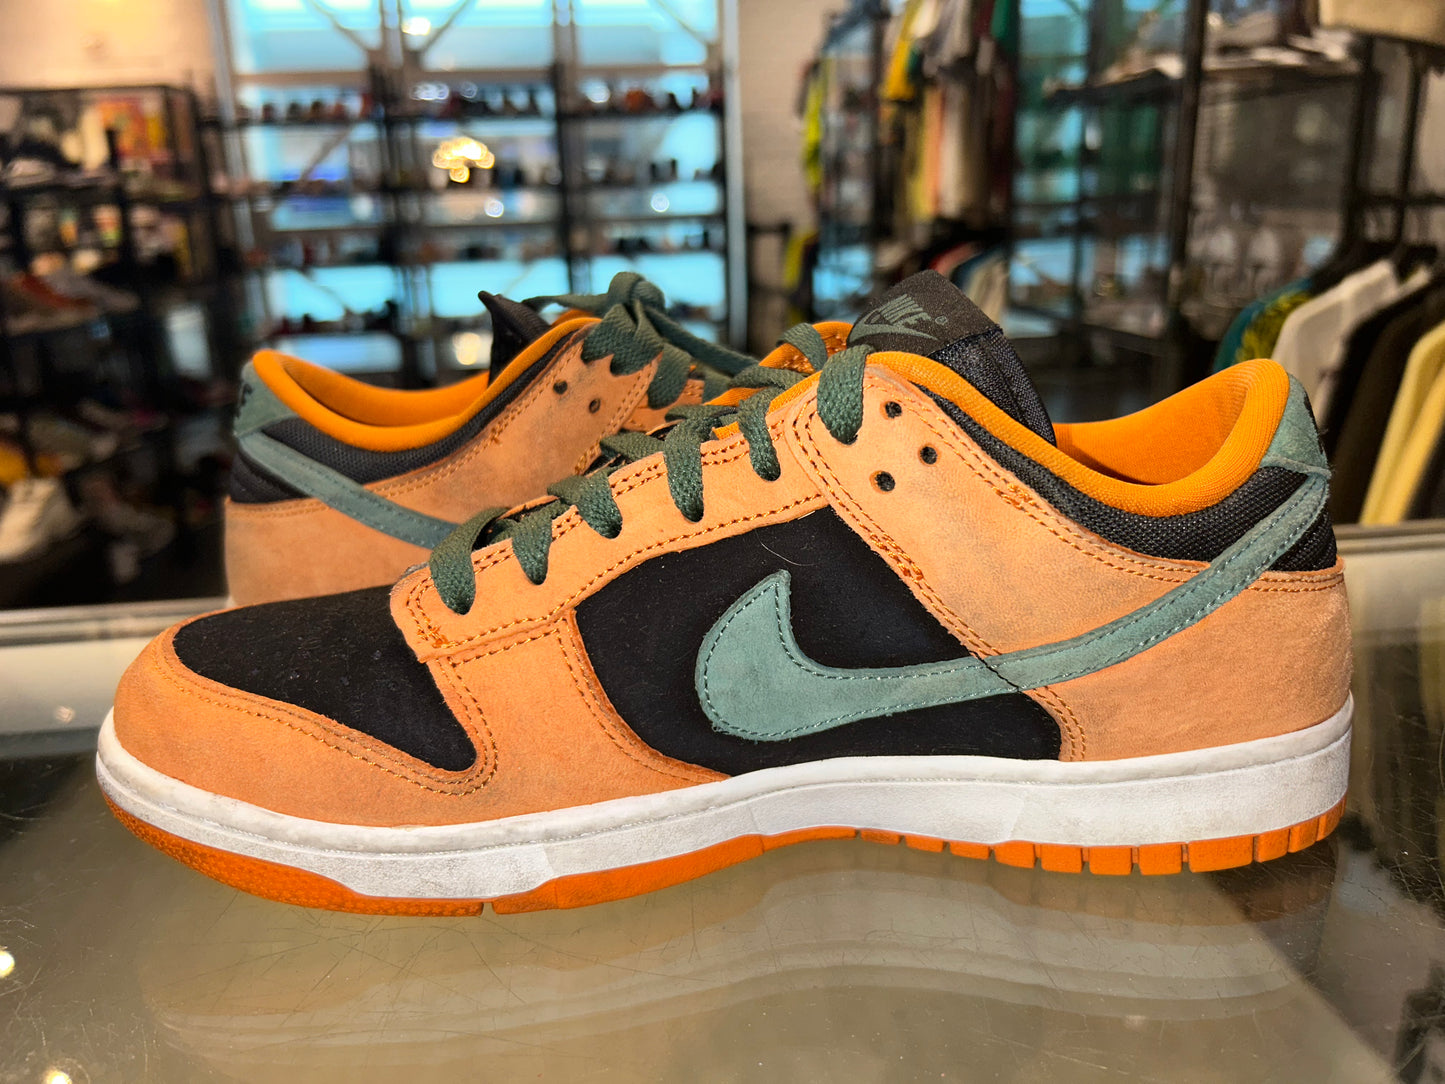 Size 8 Dunk Low “Ceramic” (Mall)